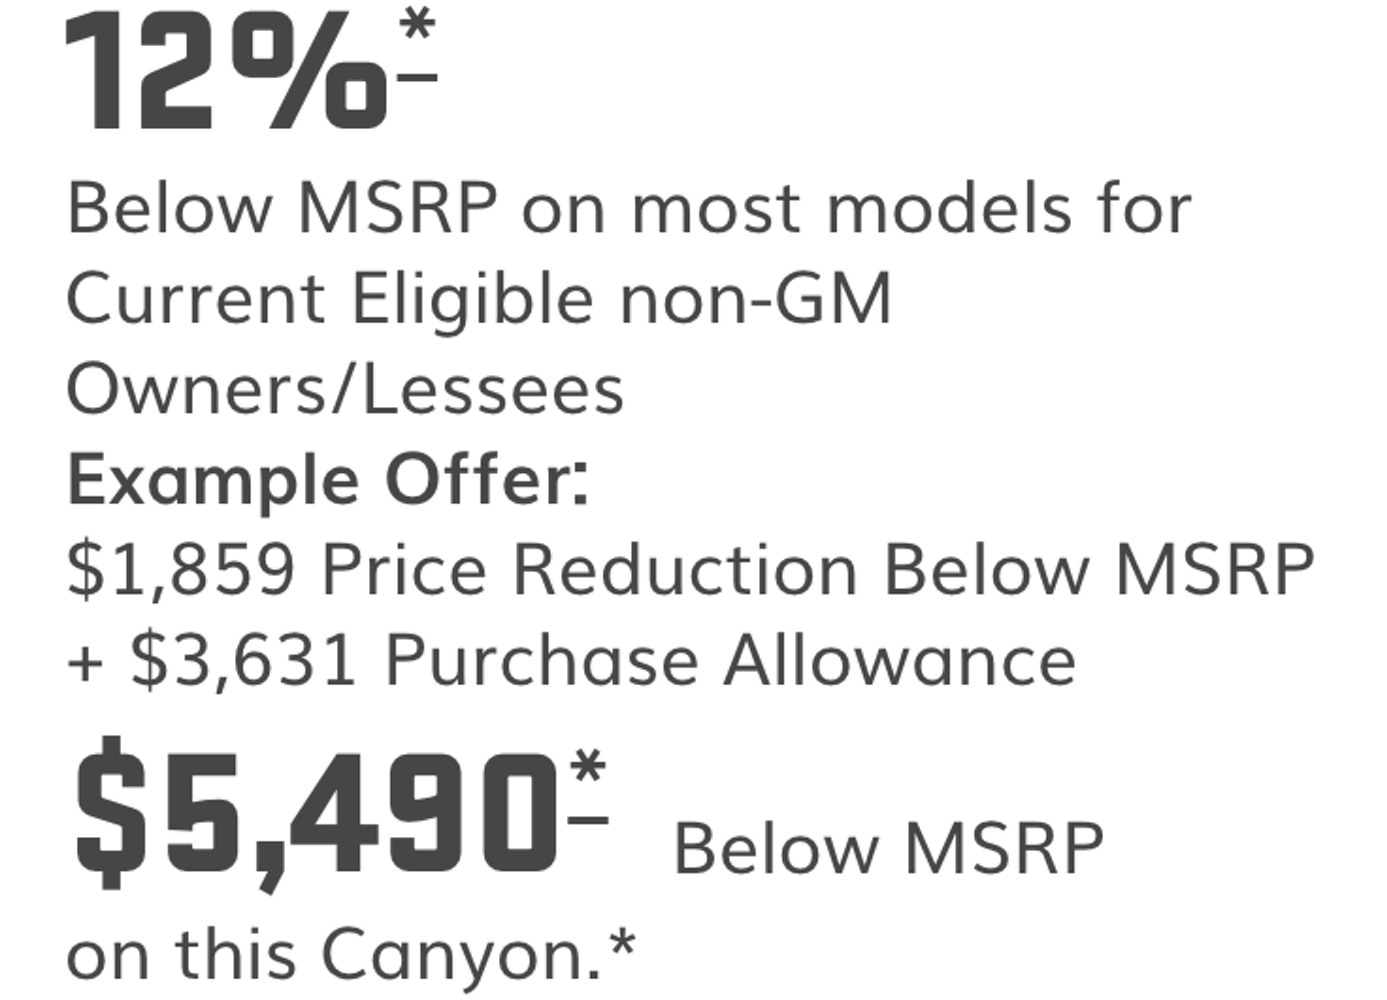 GMC Rebate Reduces Canyon Price By 12 Percent In October 2019 GM 